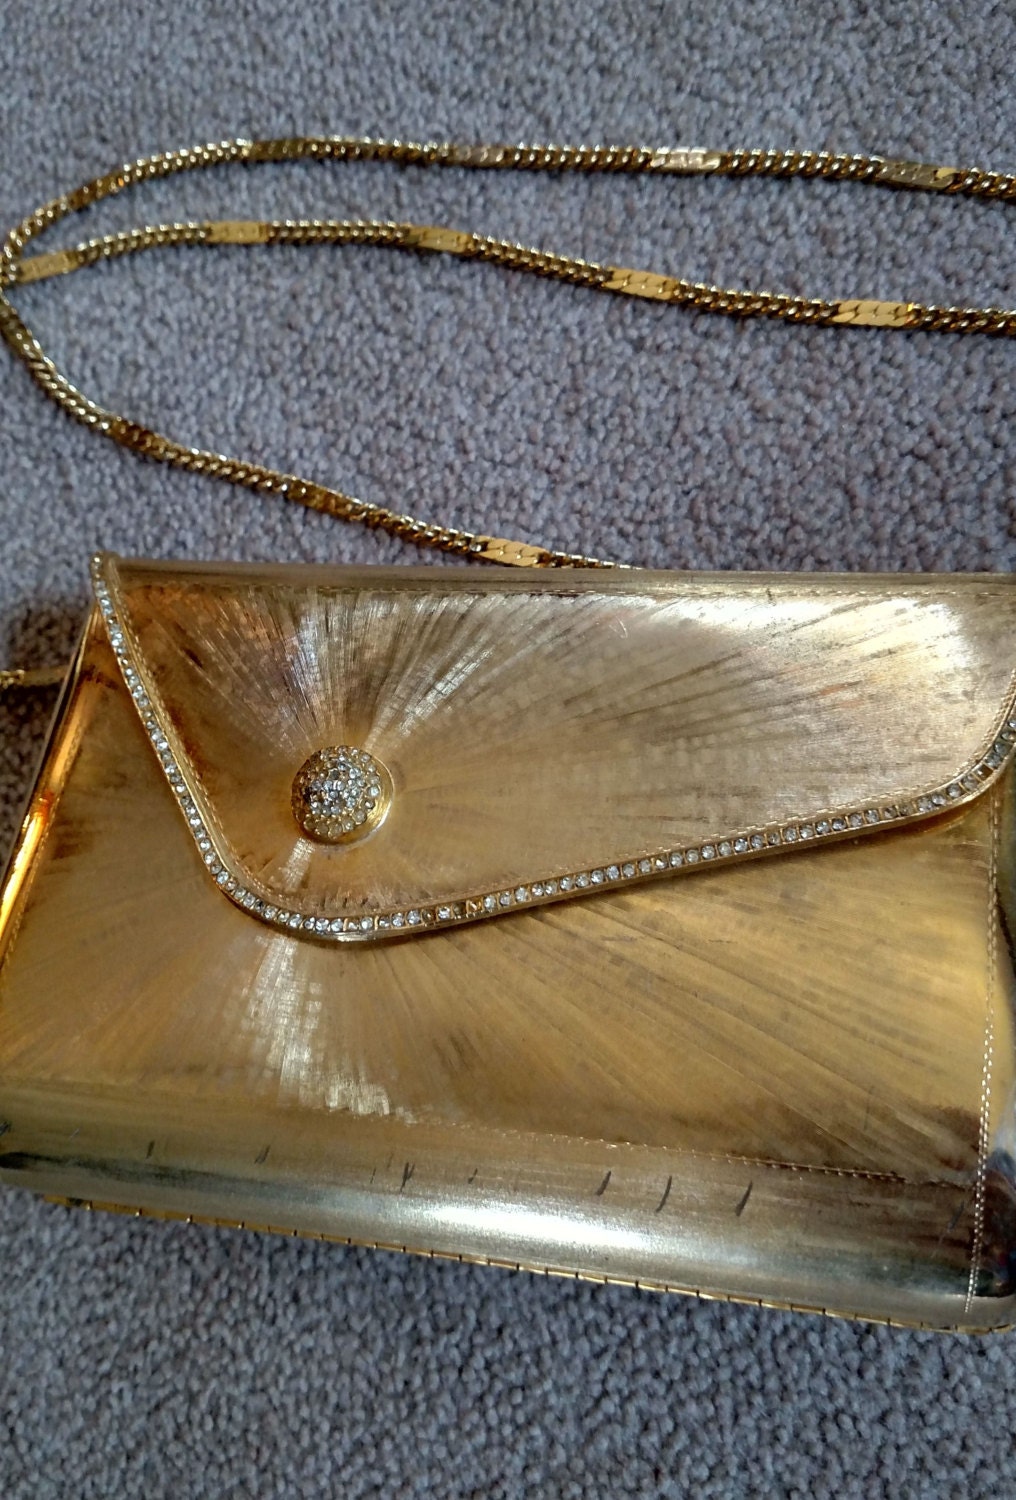 Vintage Nordstrom's made in Italy gold metal clutch purse